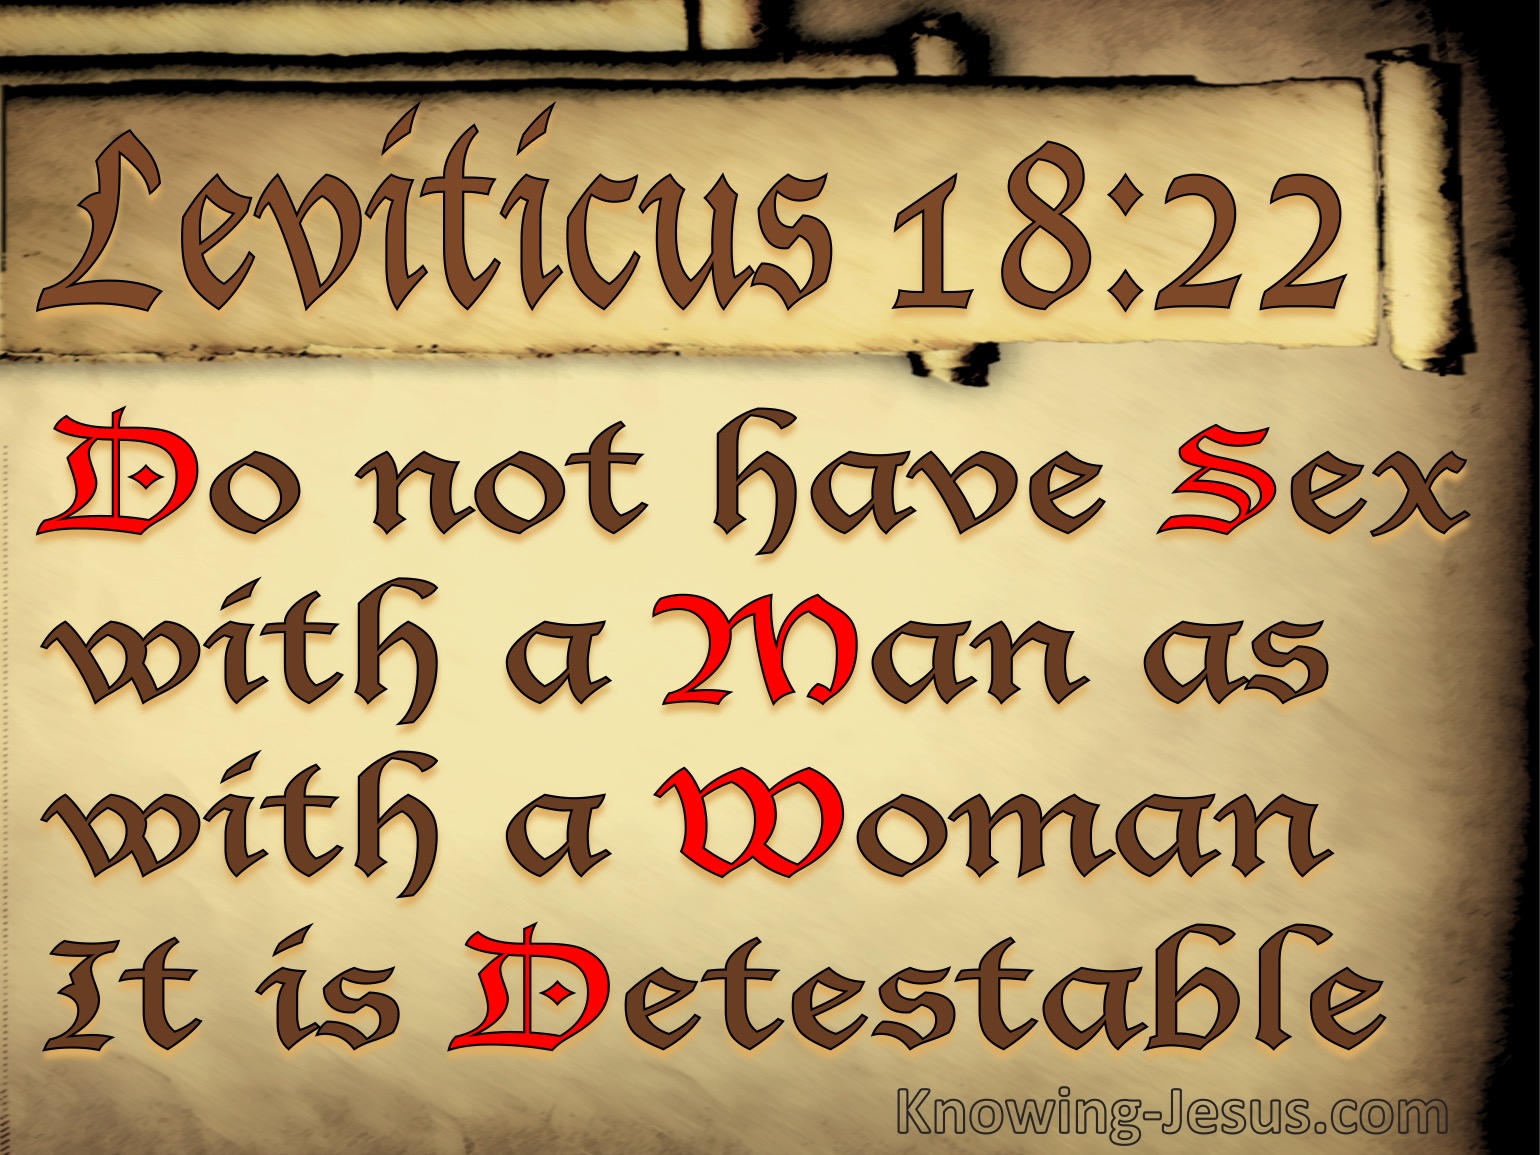 What Does Leviticus 18 22 Mean